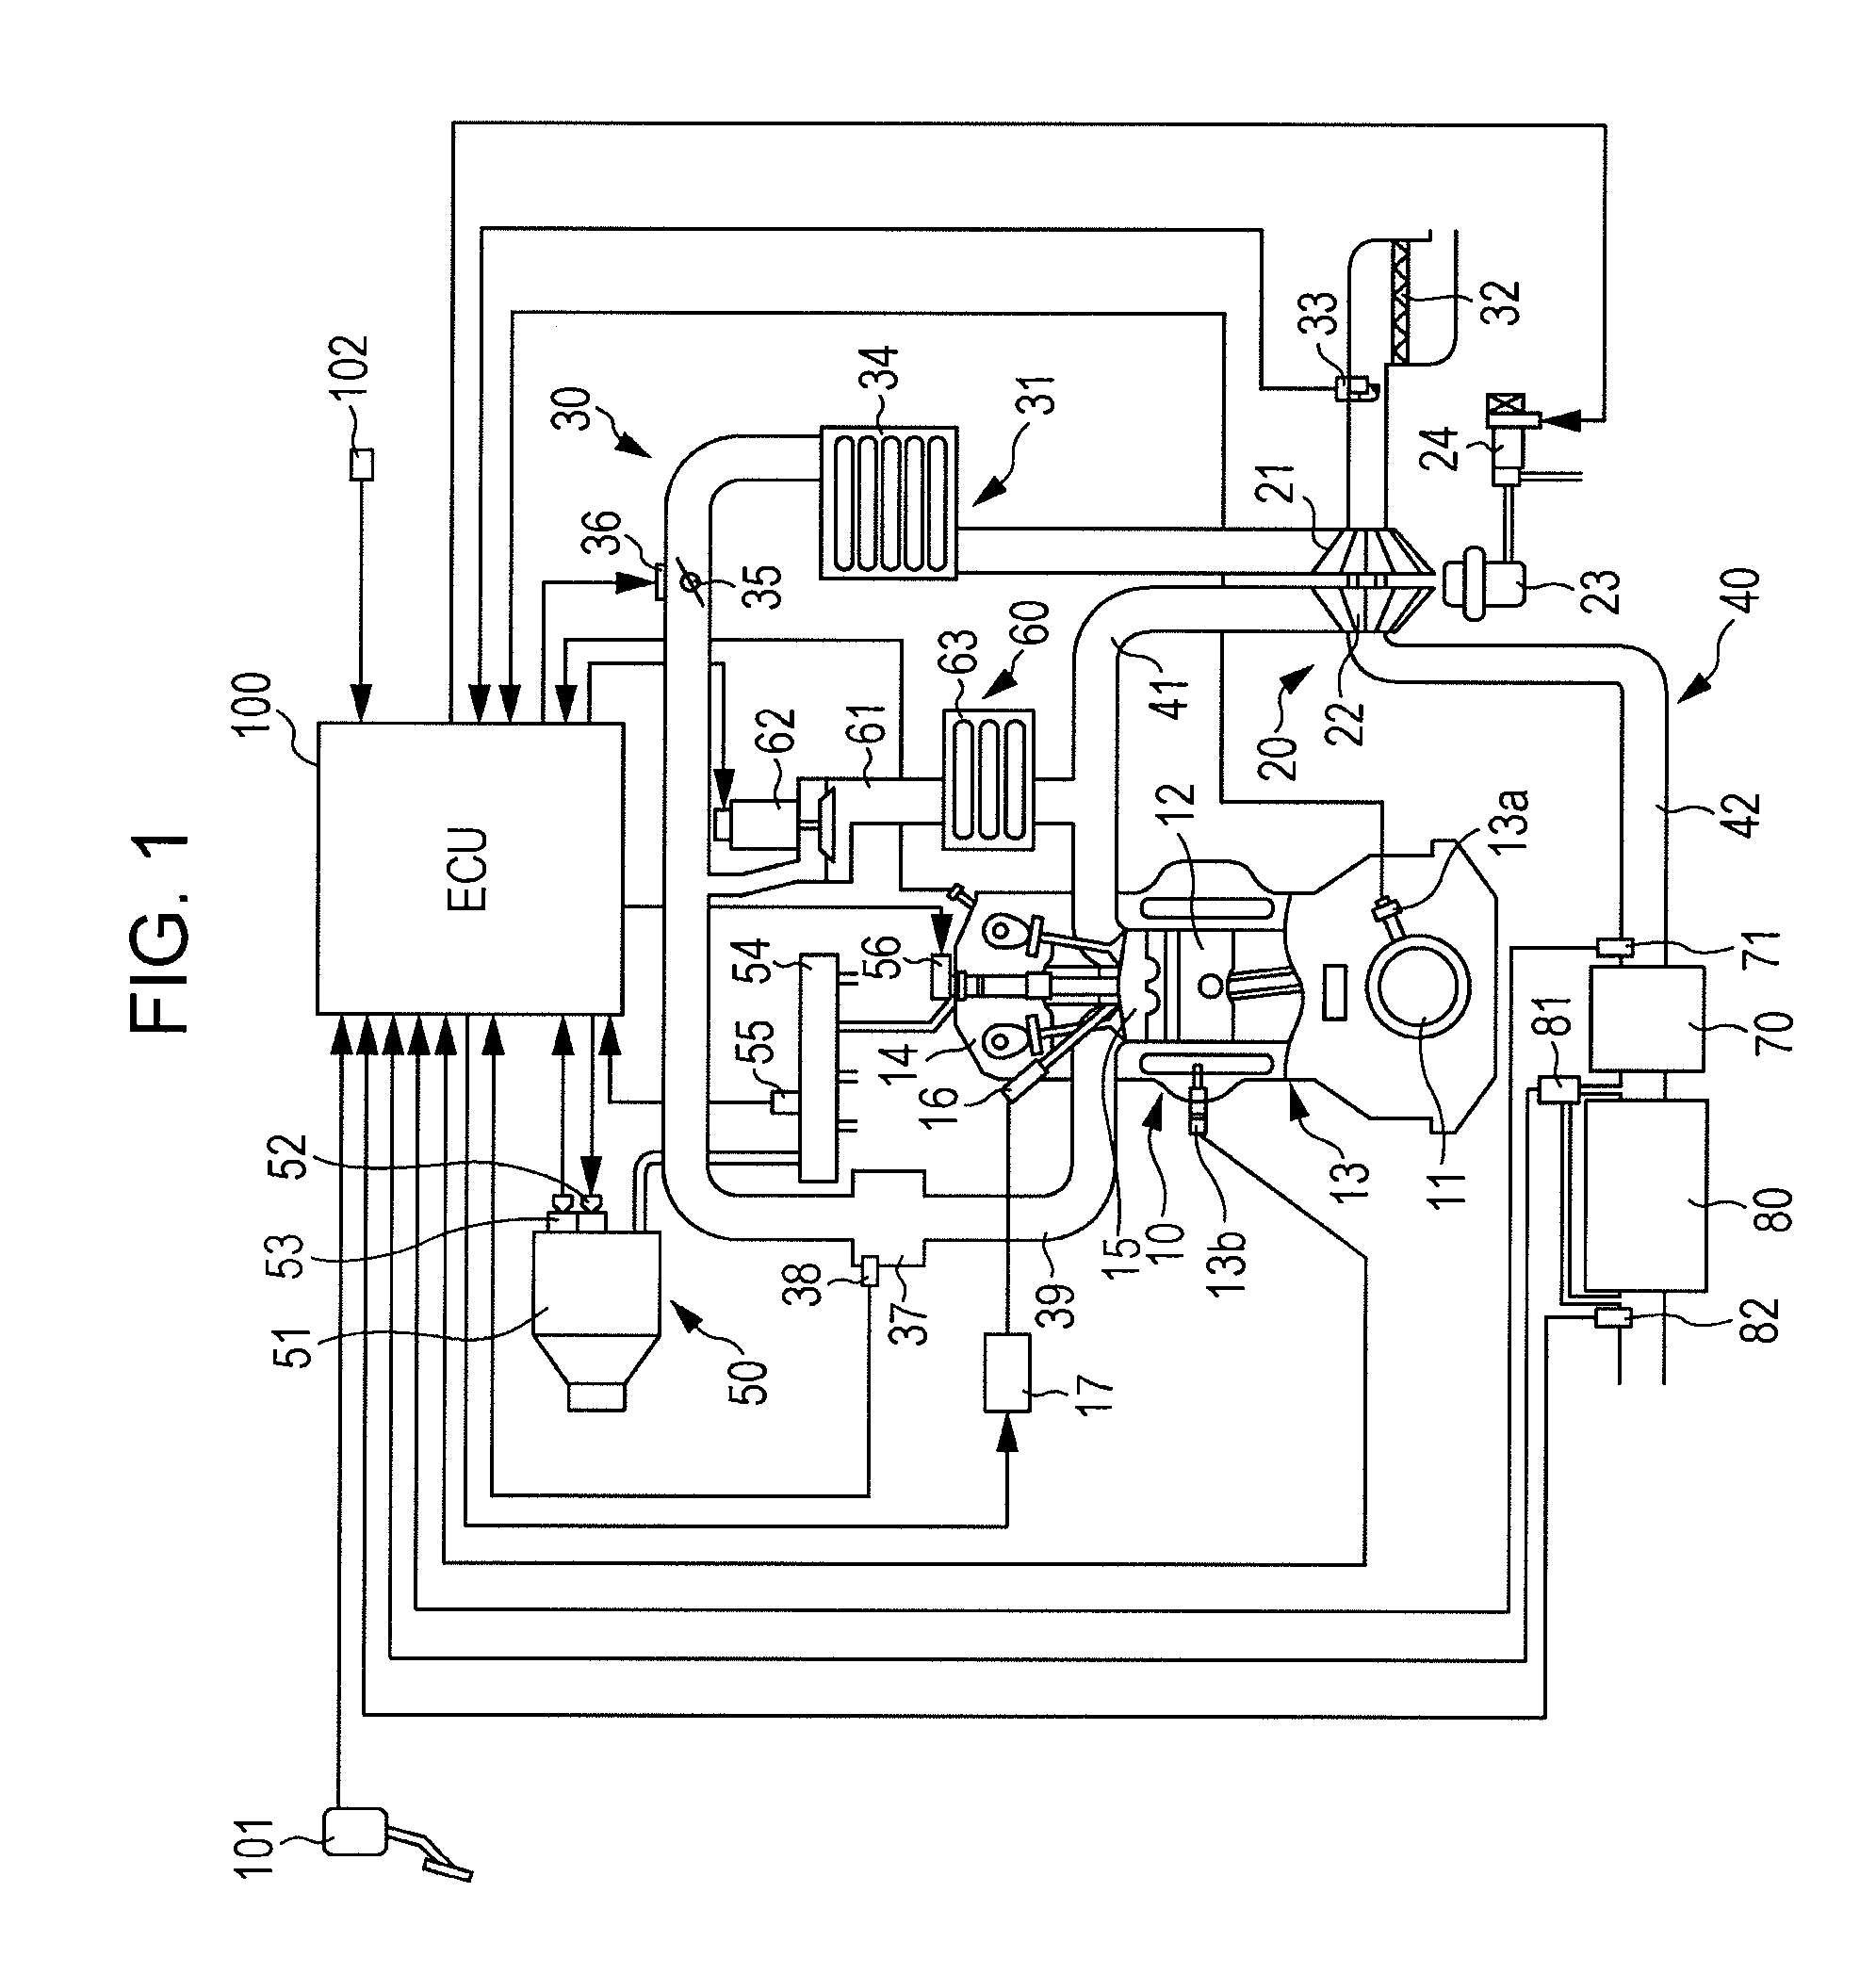 Transmission control device for automatic transmission